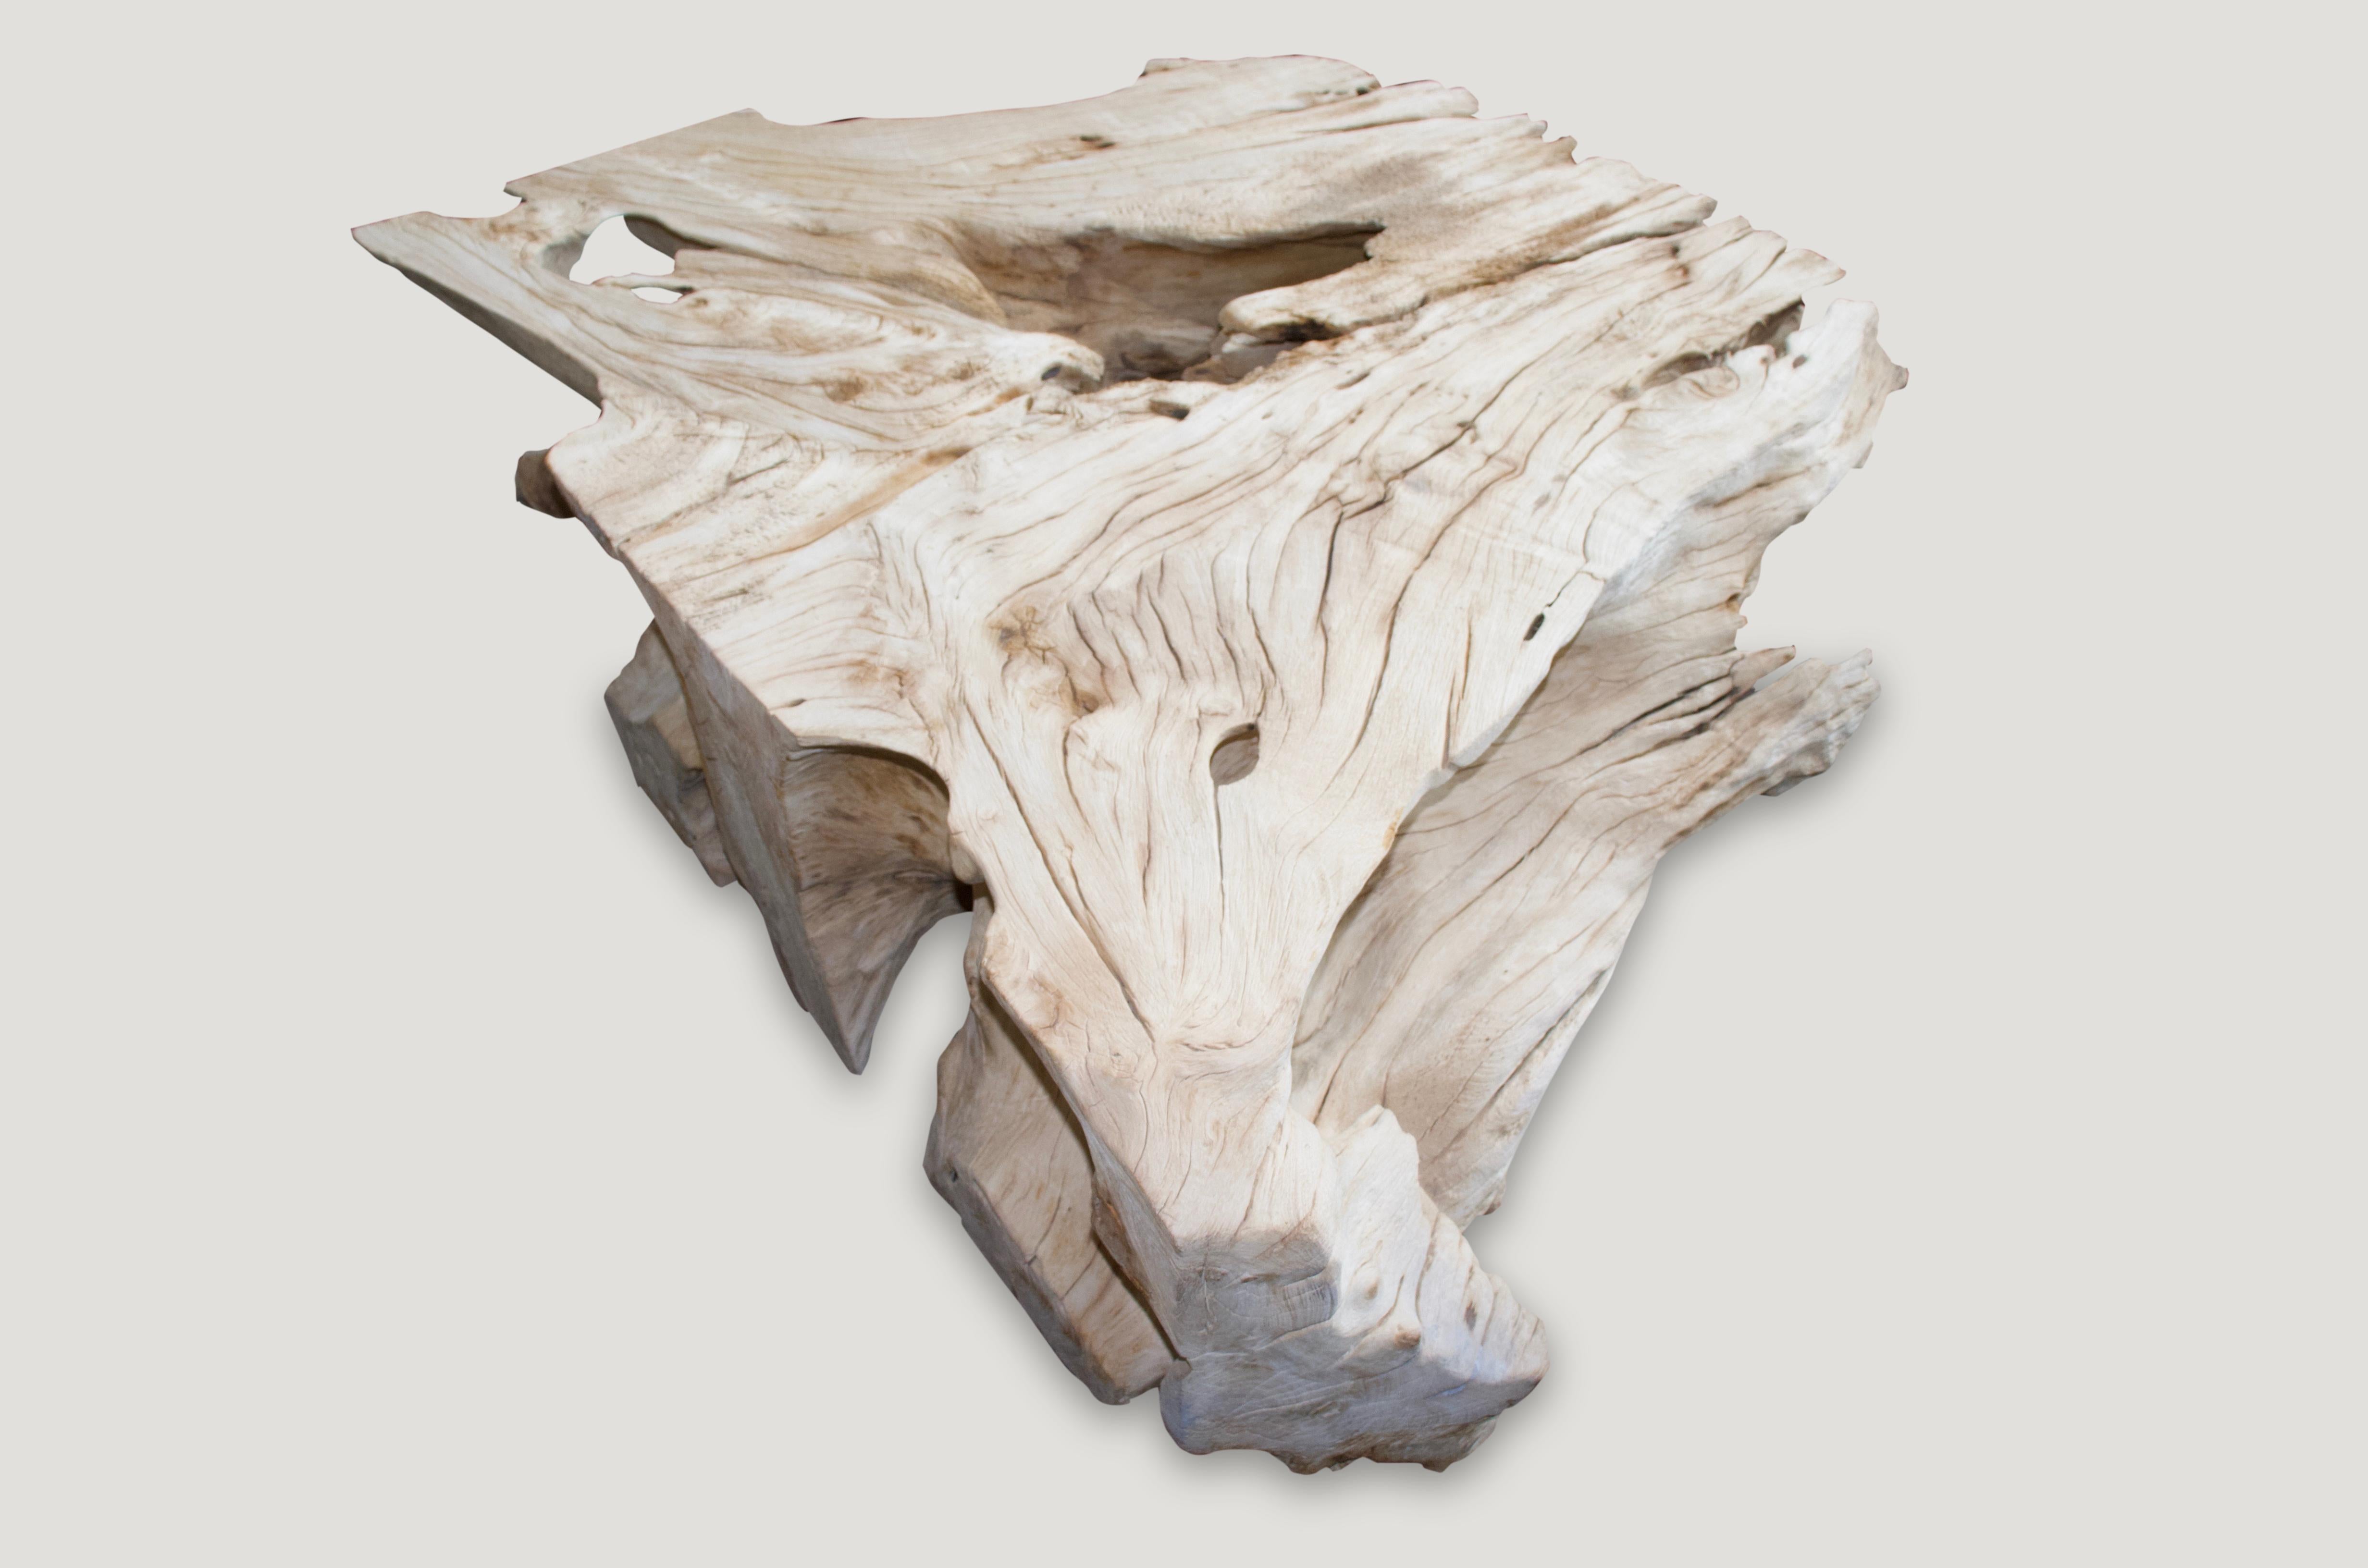 Fabulous reclaimed teak wood coffee table. Sandblasted and bleached for this unique finish. Stunning. Organic is the new modern.

The St. Barts collection features an exciting new line of organic white wash and natural weathered teak furniture.